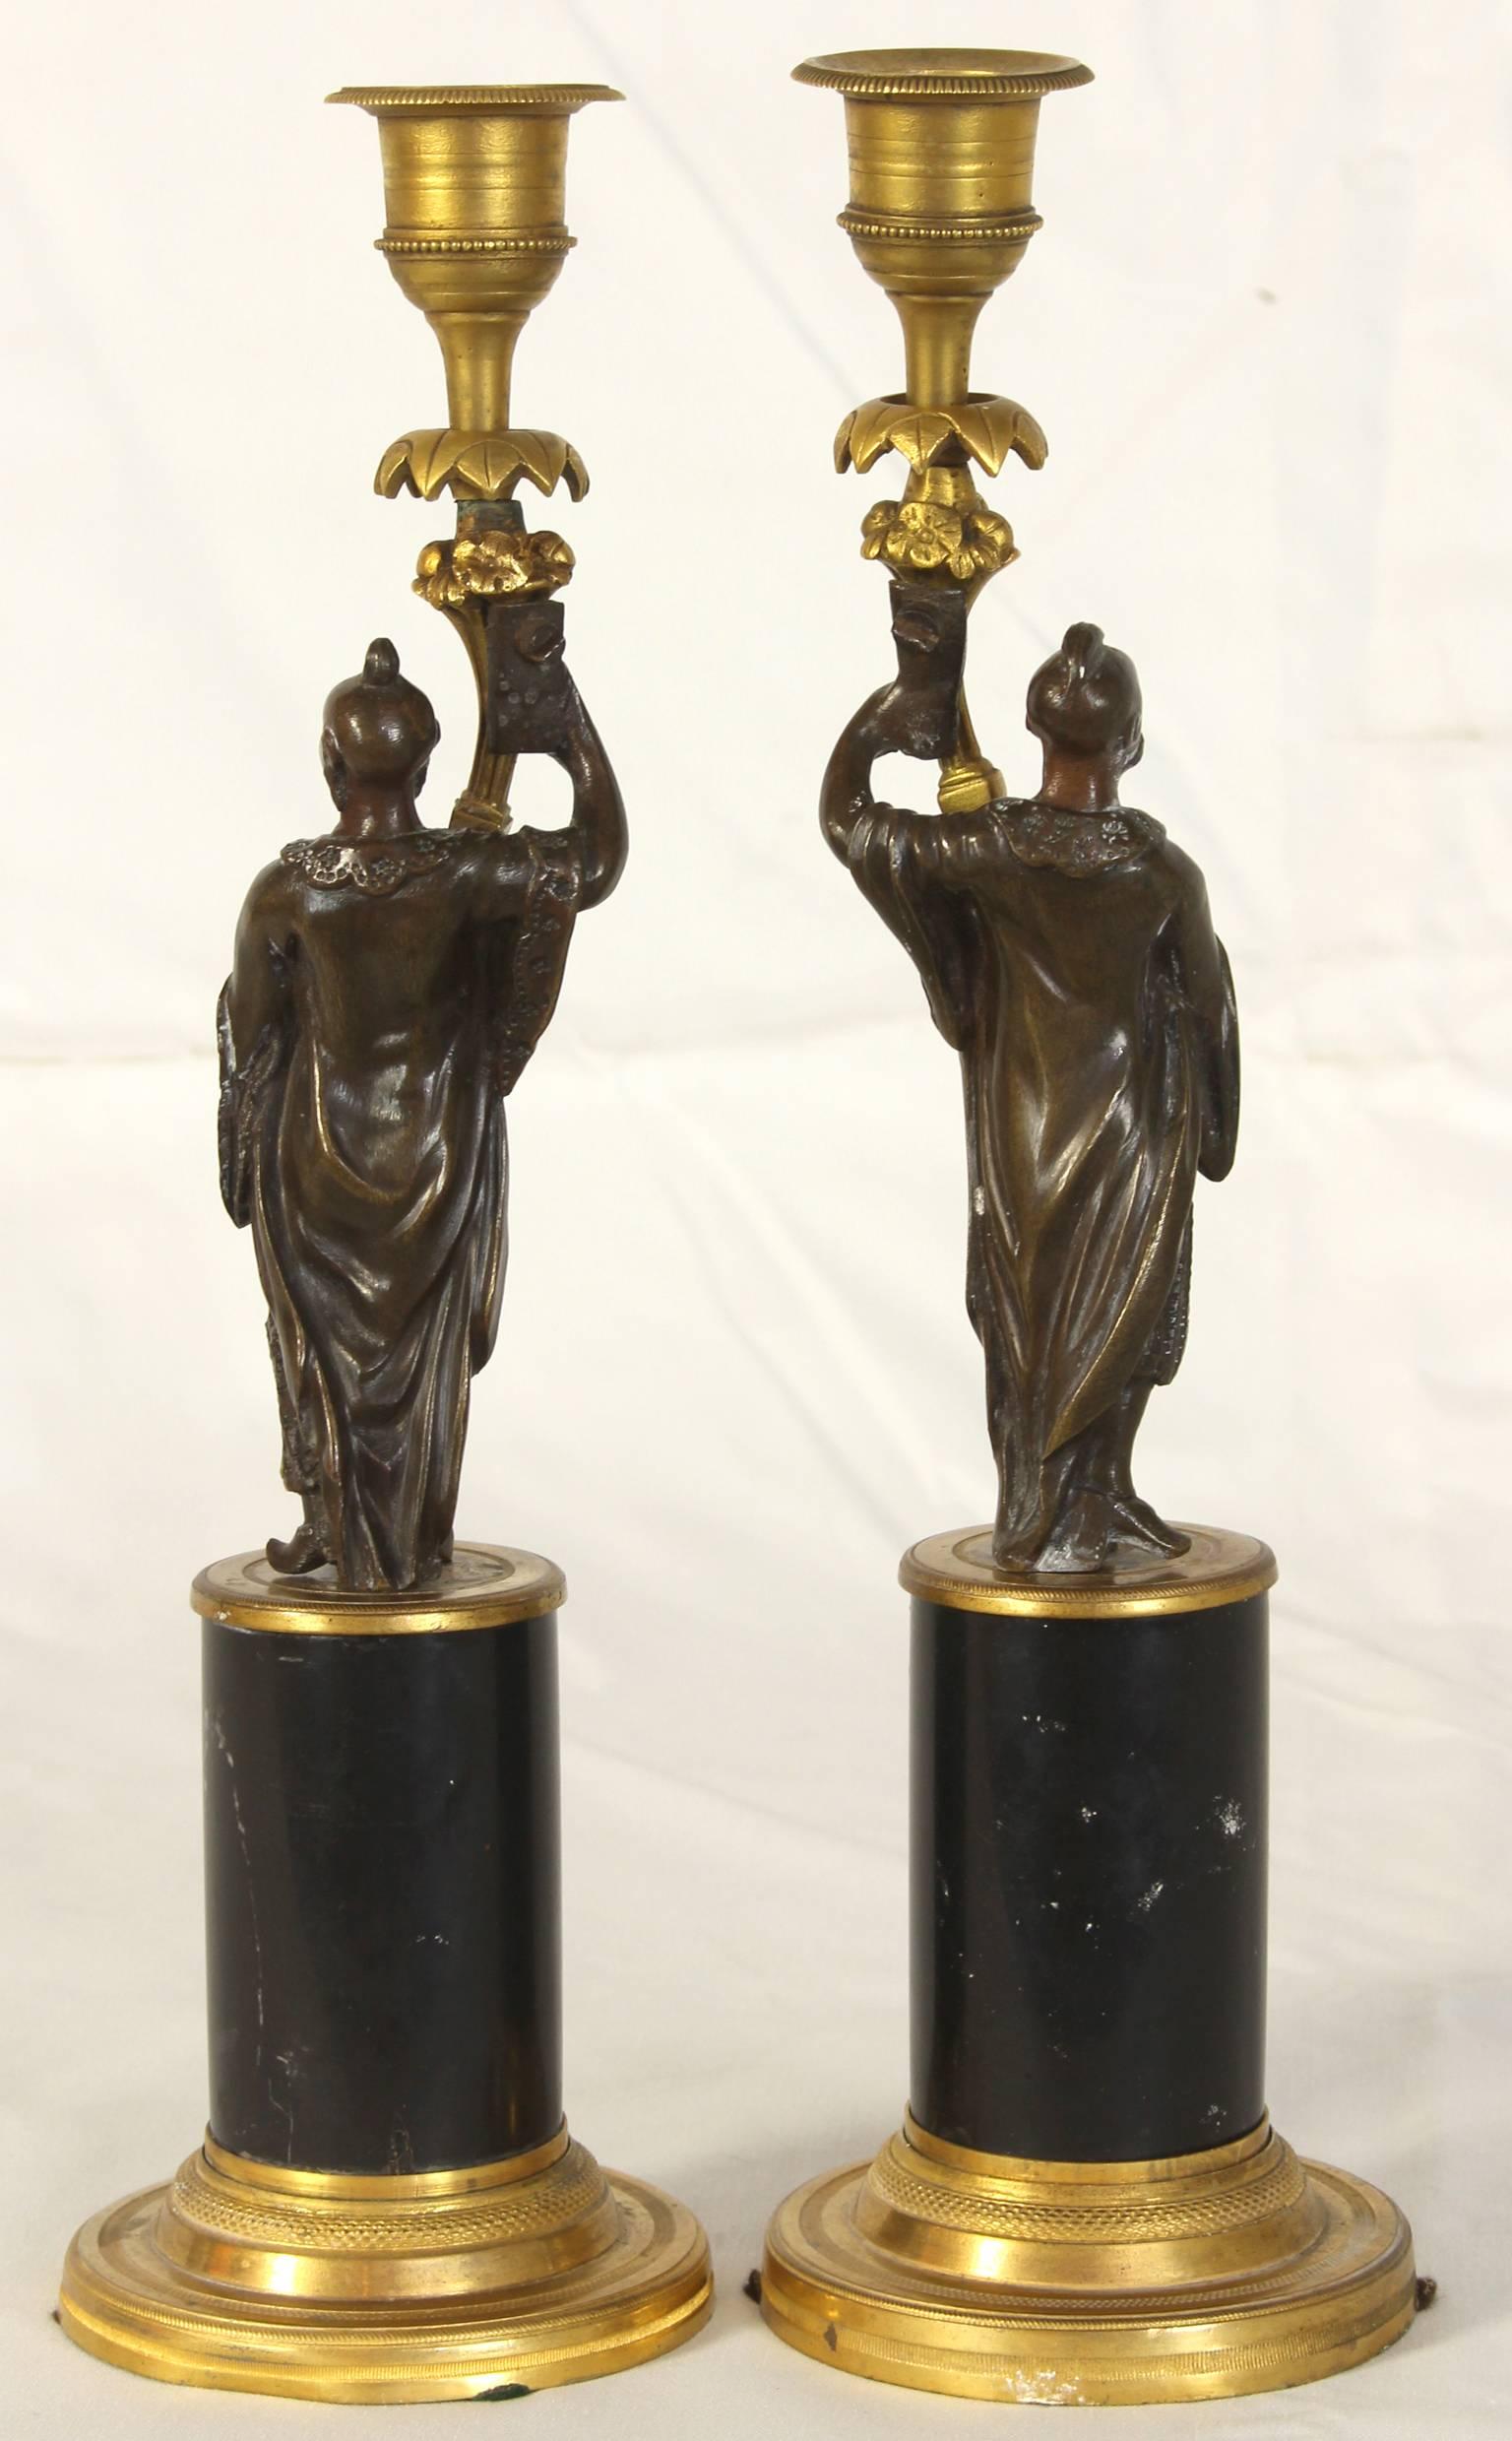 Regency Pair of Early 19th Century Chinoiserie Figural Candlesticks For Sale